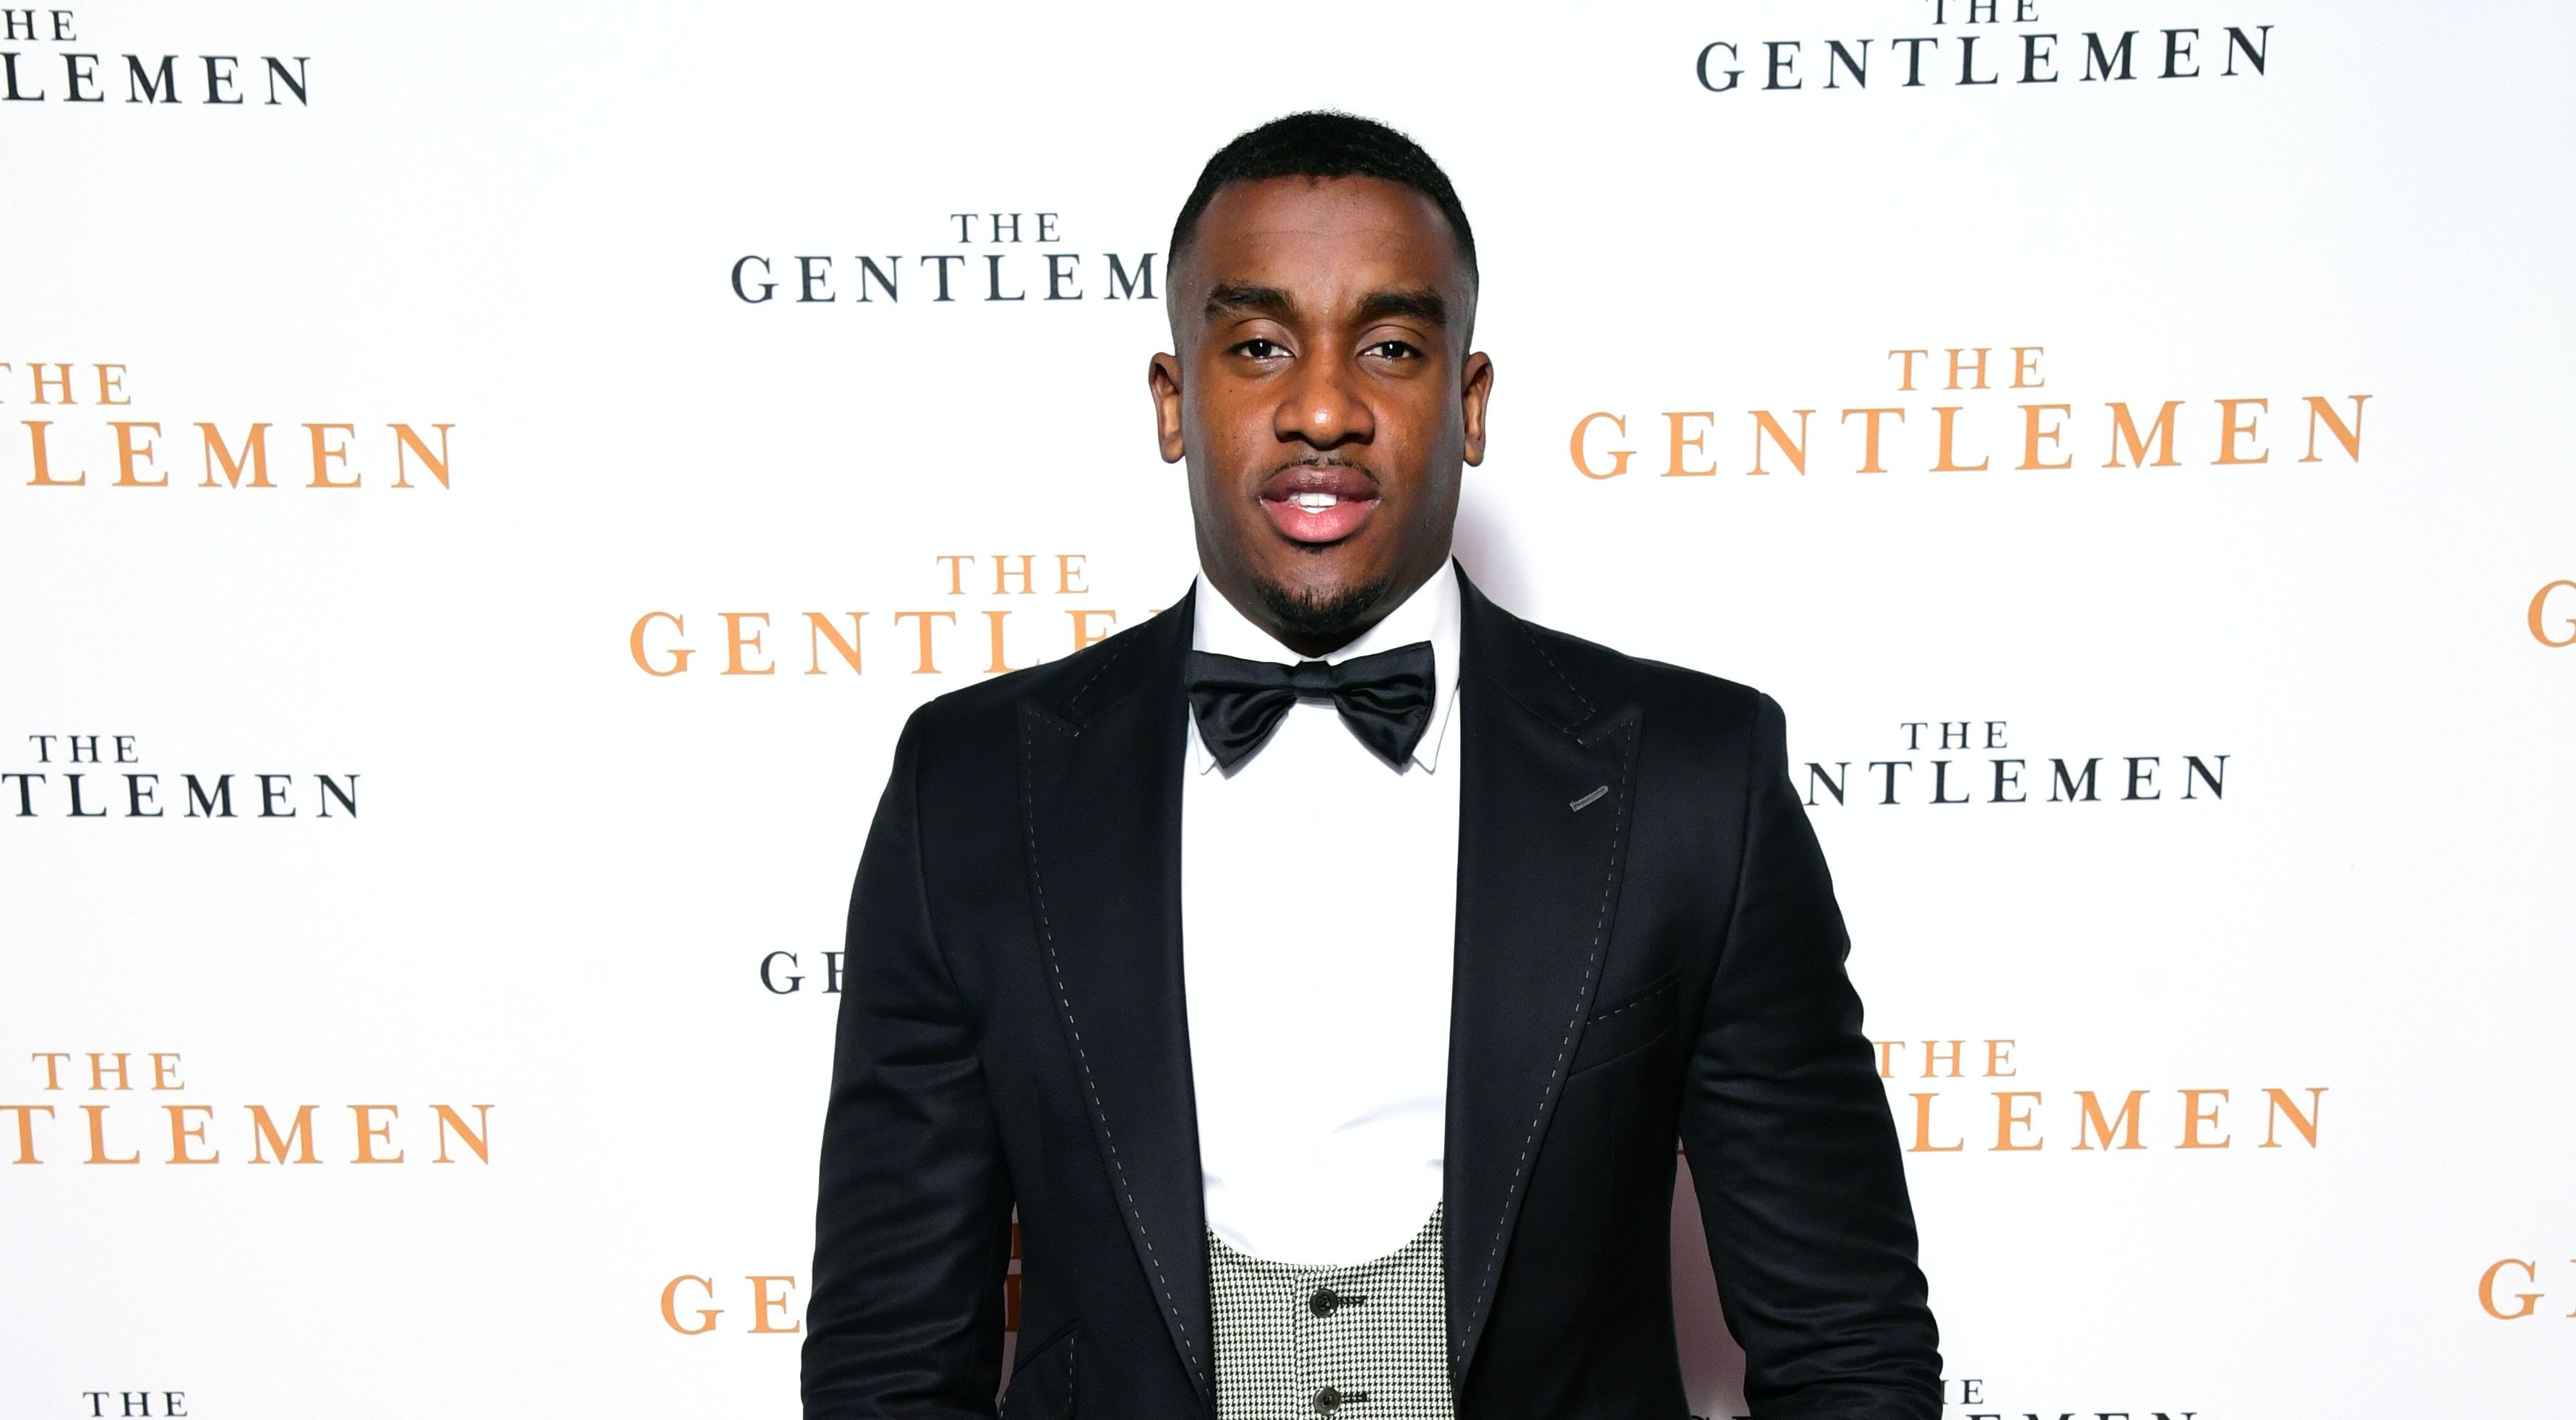 BUGZY MALONE RELEASES FILM DOCUMENTARY FOR HIS LAST EVER TOUR - YEEEAAH!  NETWORK